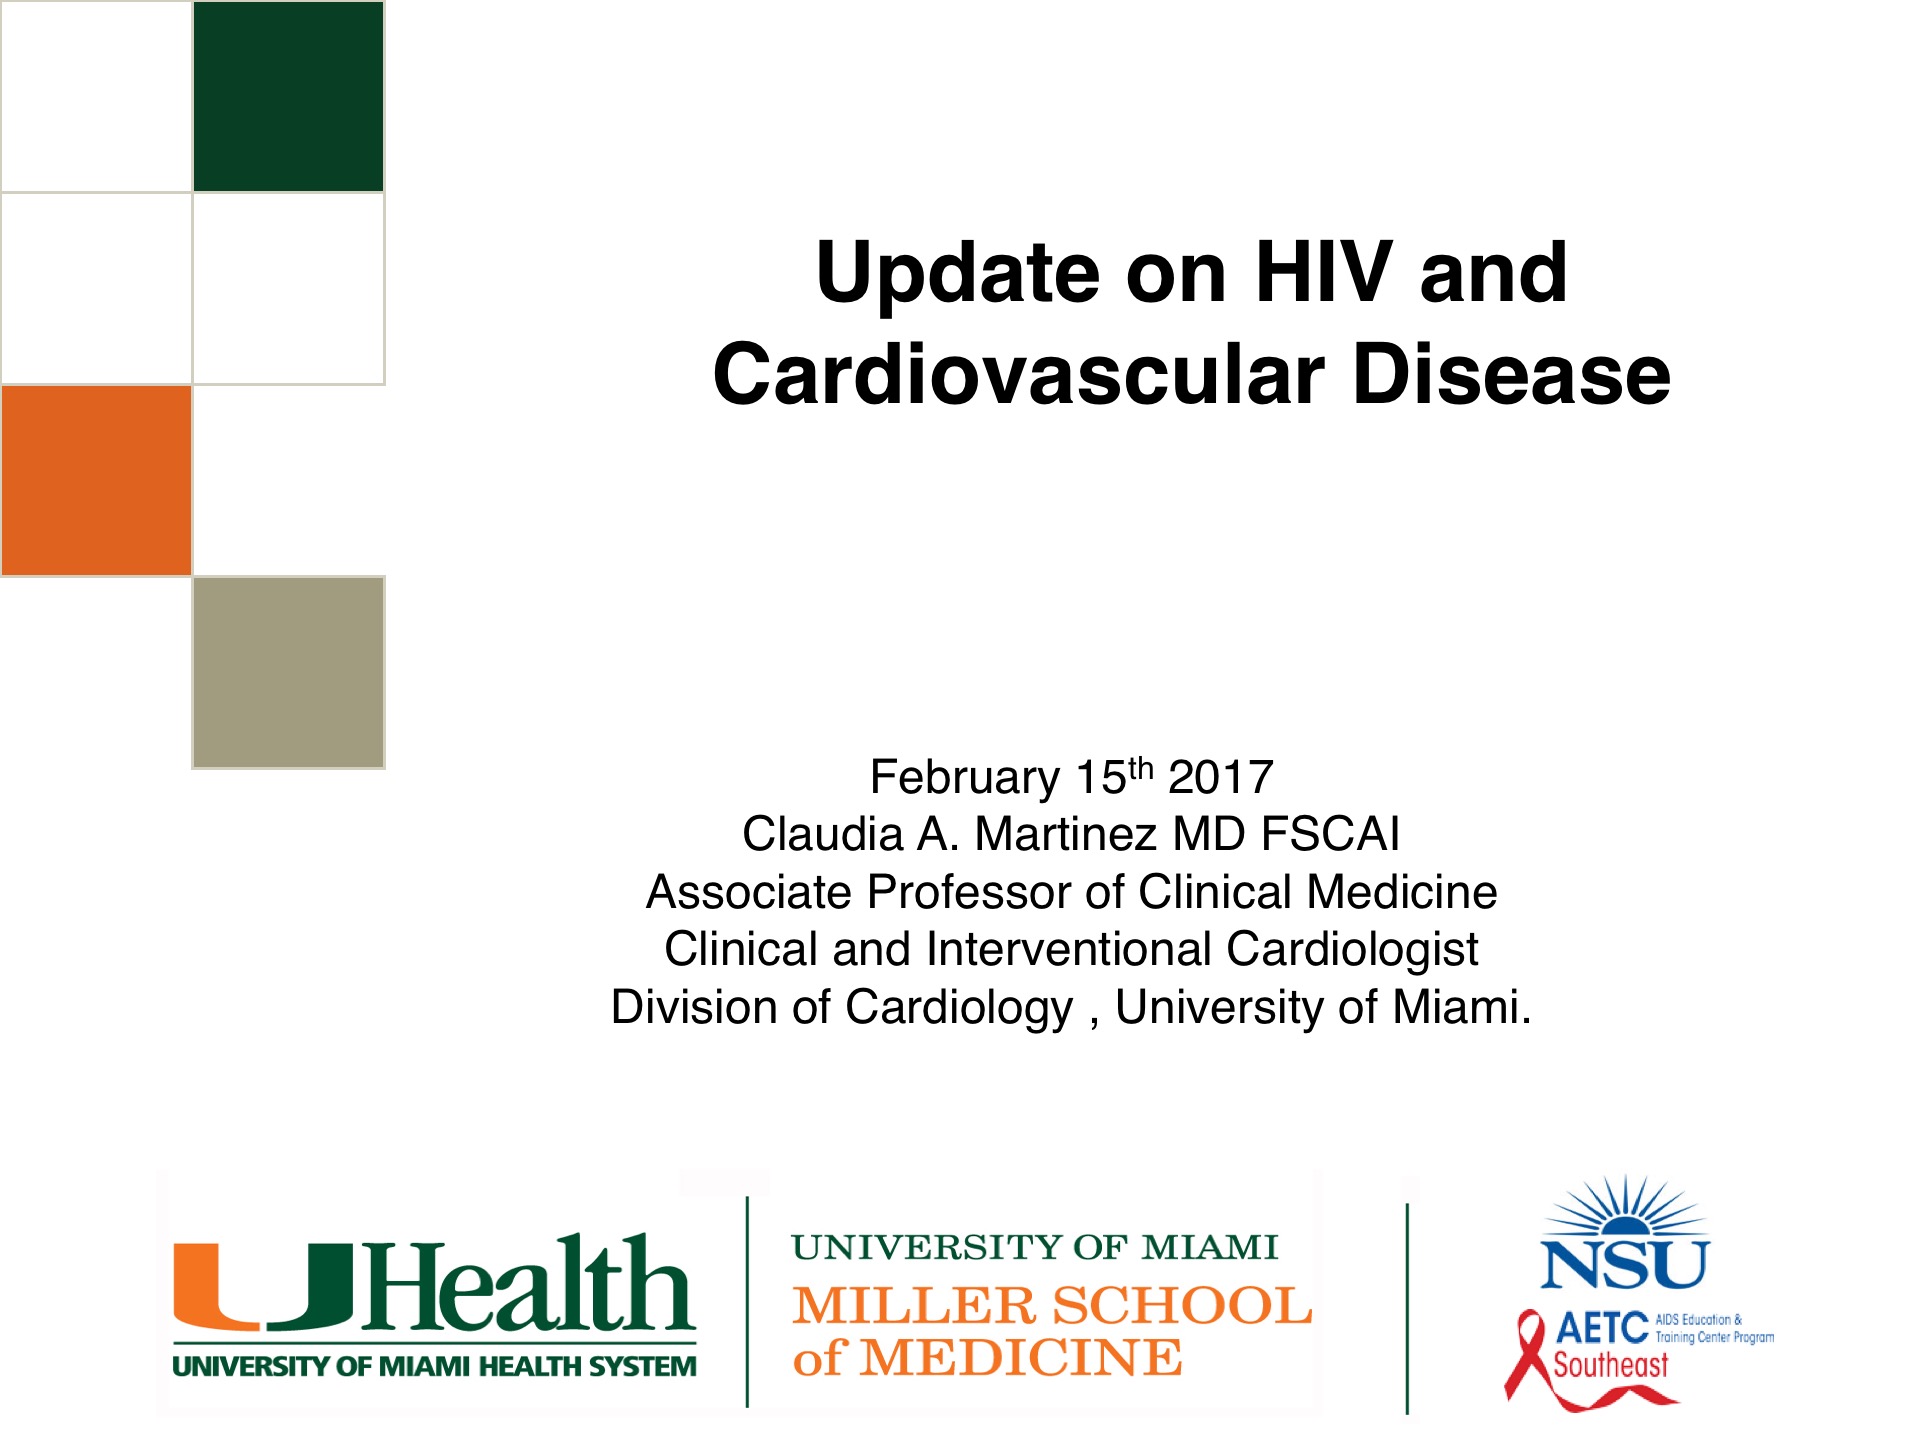 Update on HIV and Cardiovascular Disease